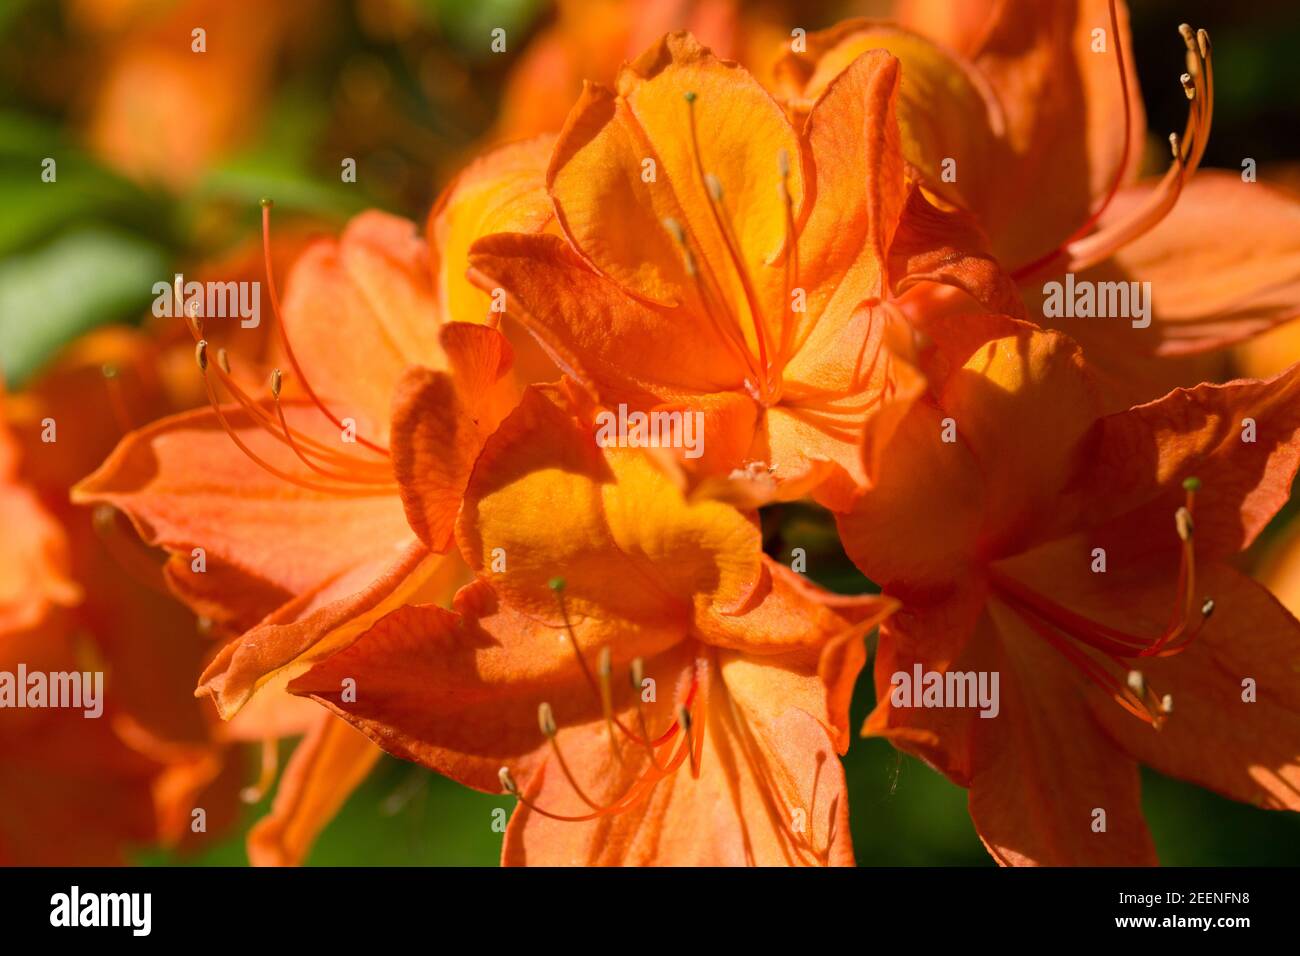 Yellow rhododendron with orange and white splashes Stock Photo